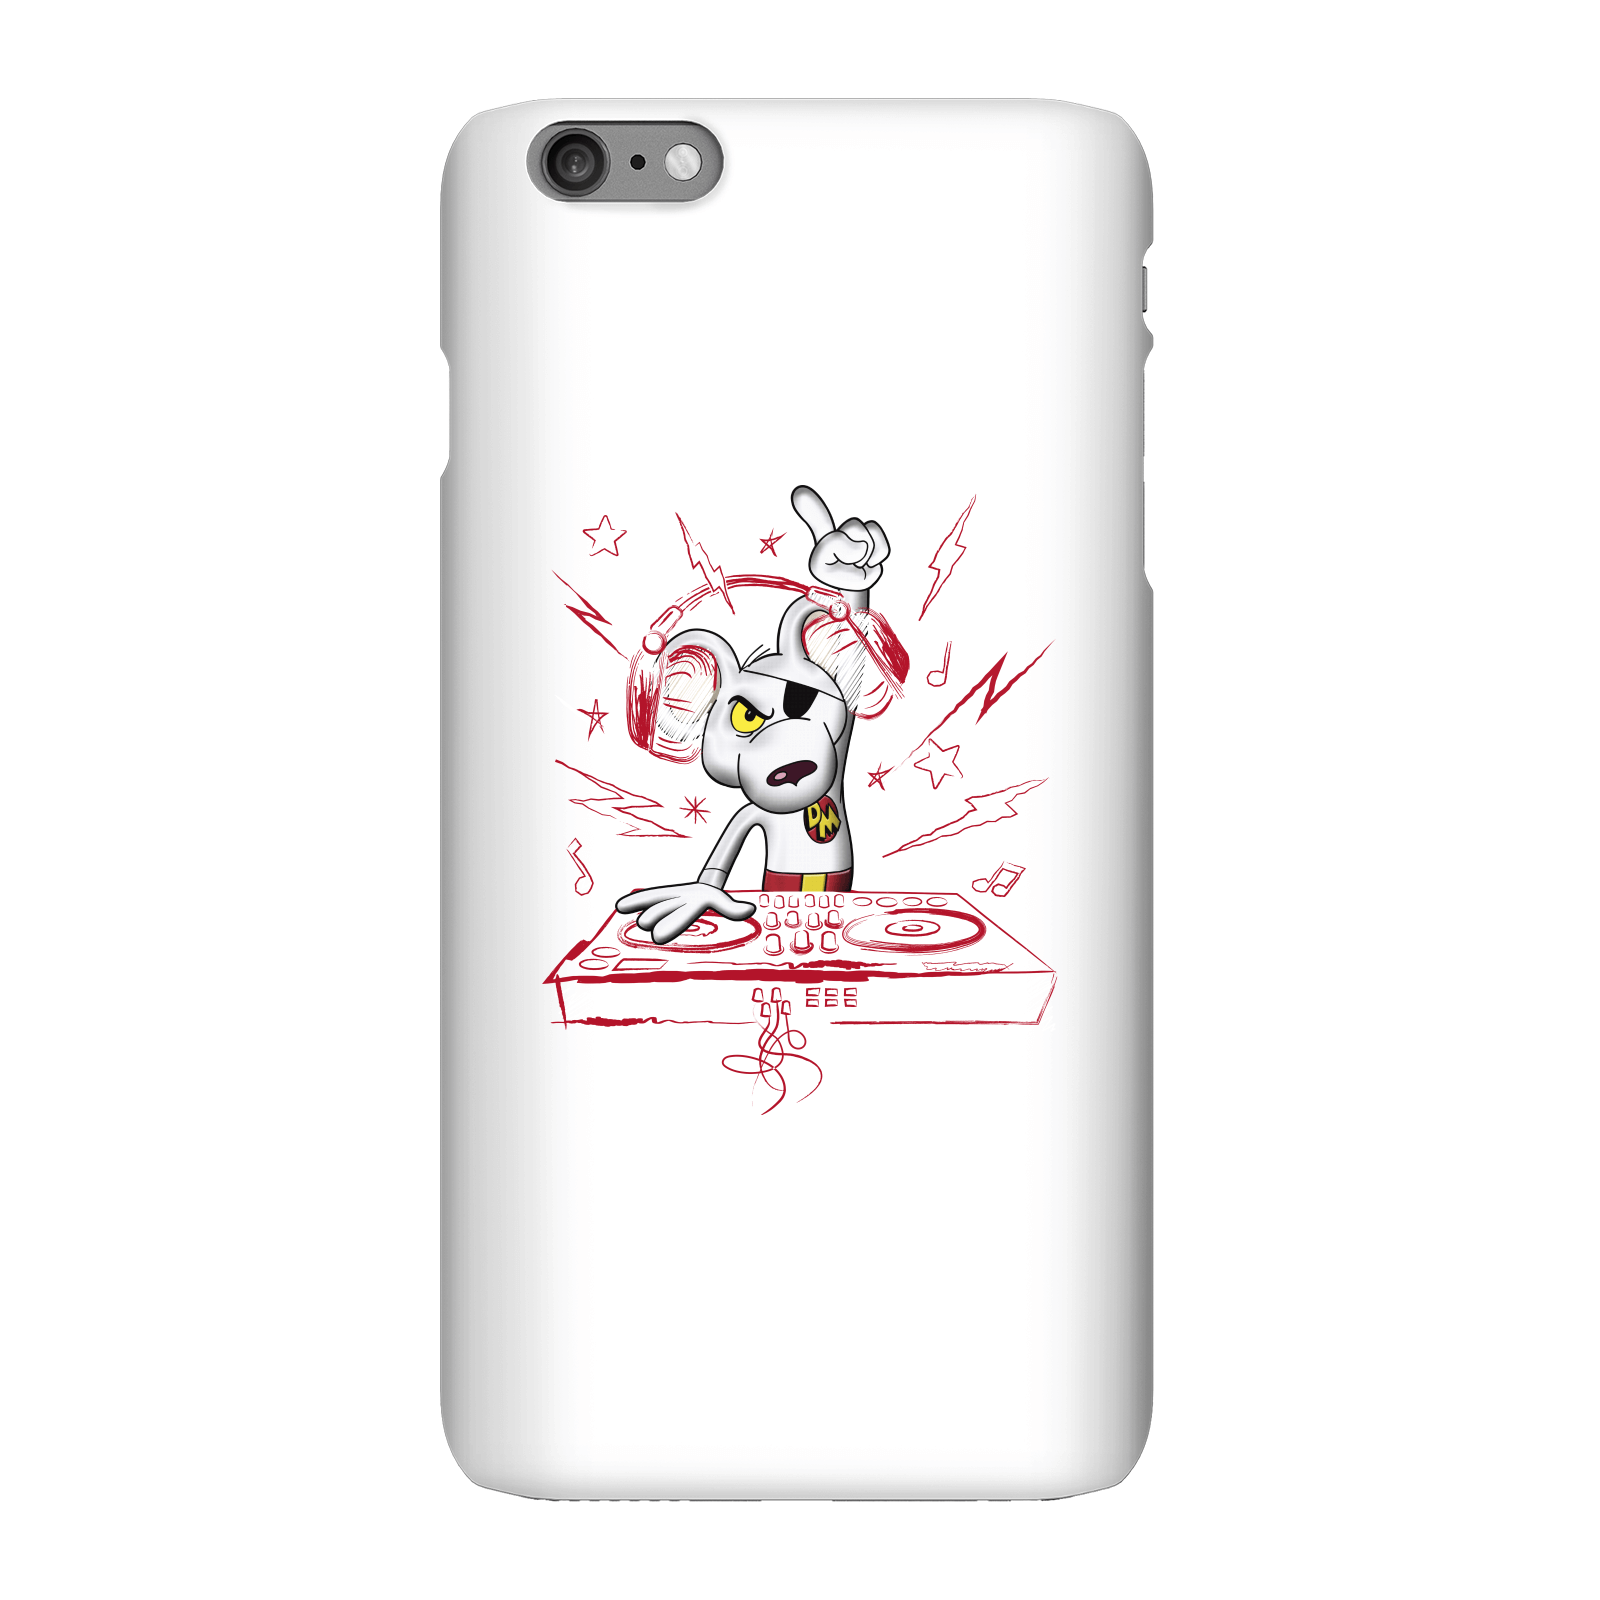 Danger Mouse DJ Phone Case for iPhone and Android - iPhone 6 Plus - Snap Case - Gloss